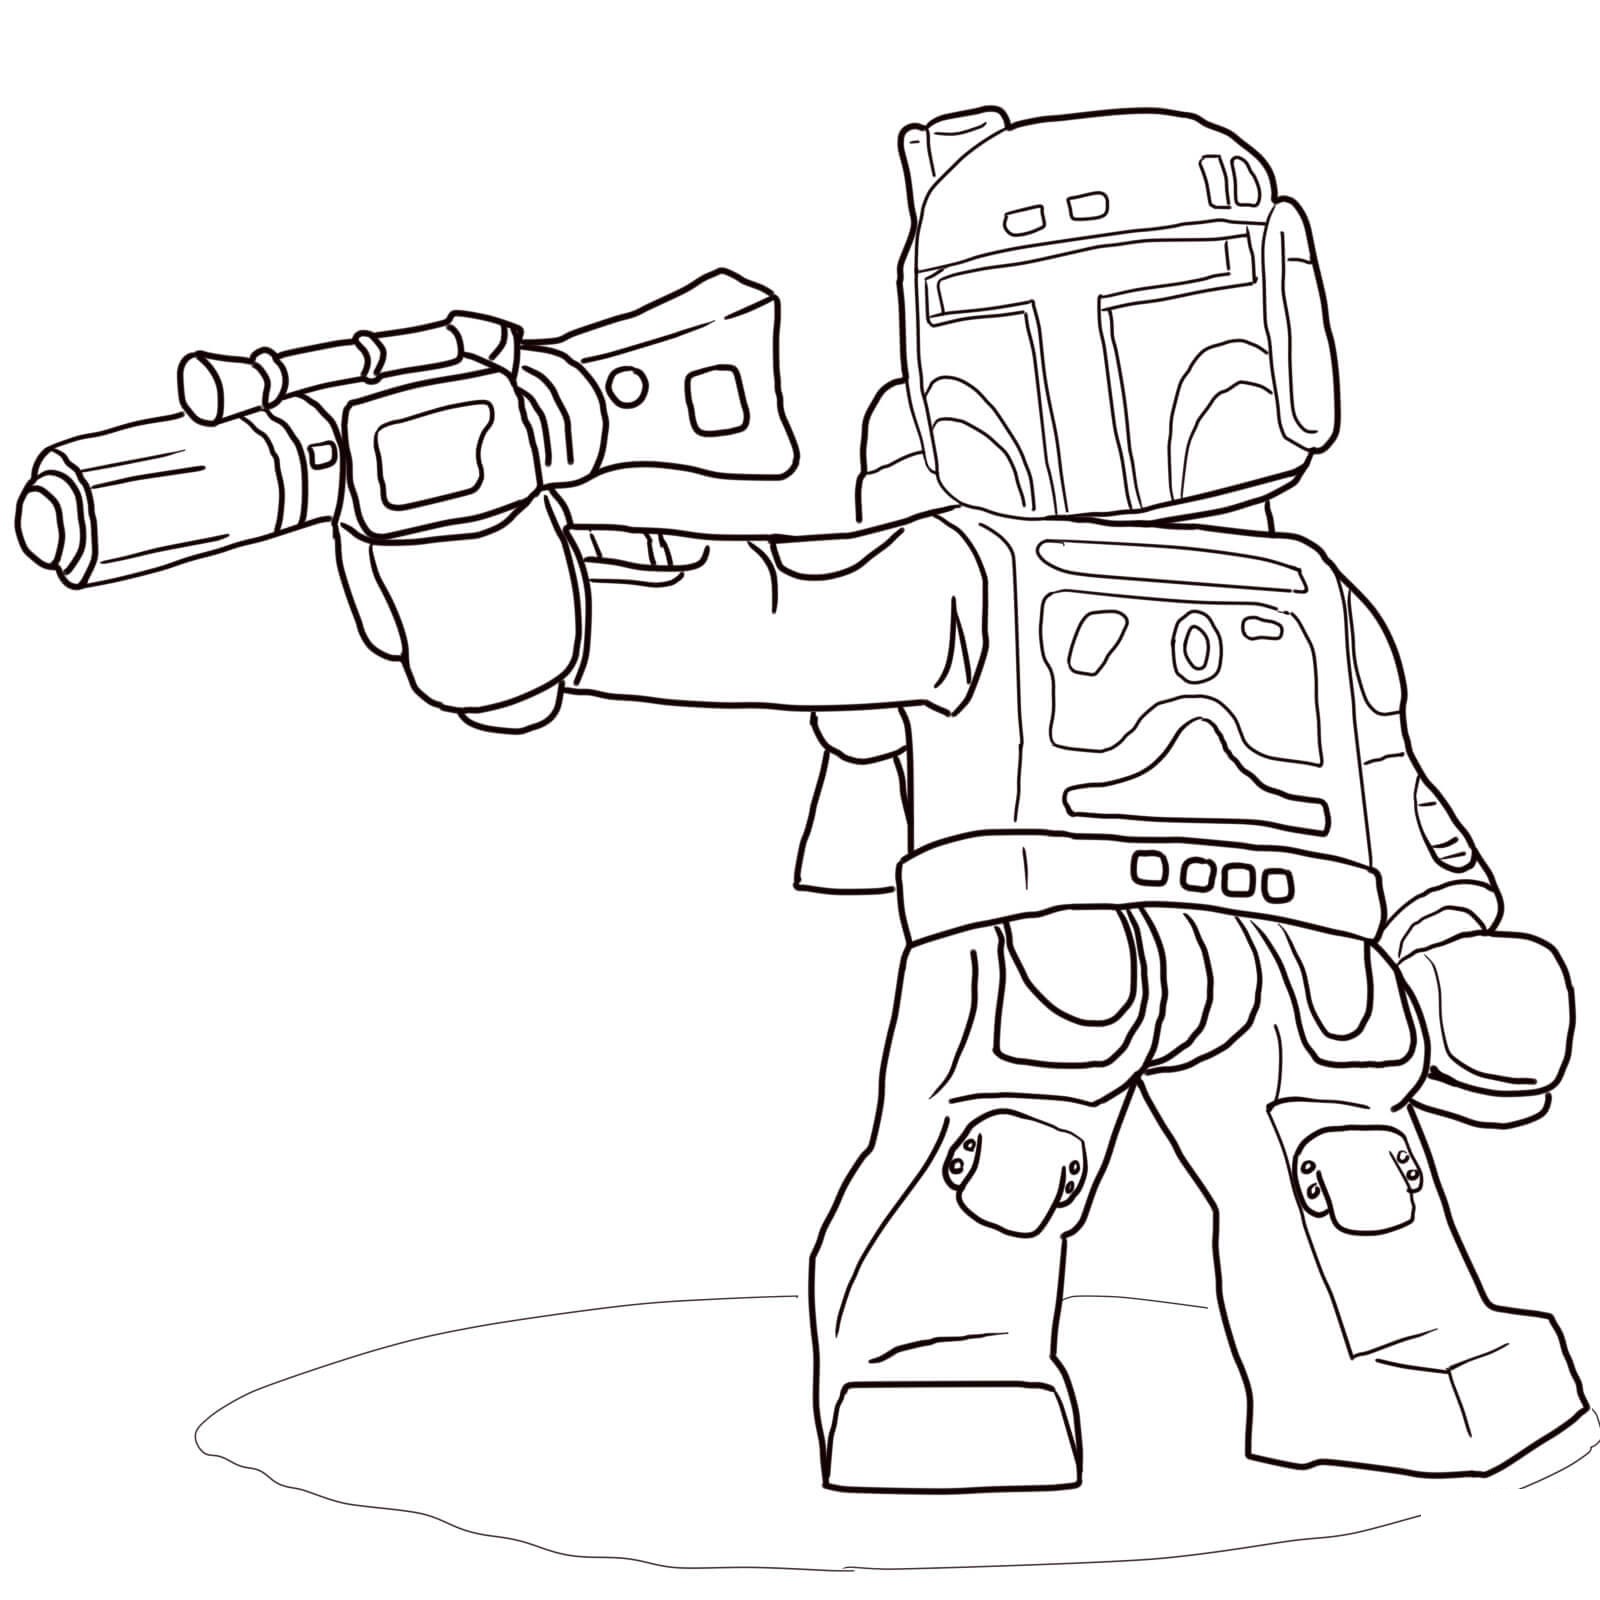 Lego Star Wars Boba Fett Coloring Pages   Coloring Cool